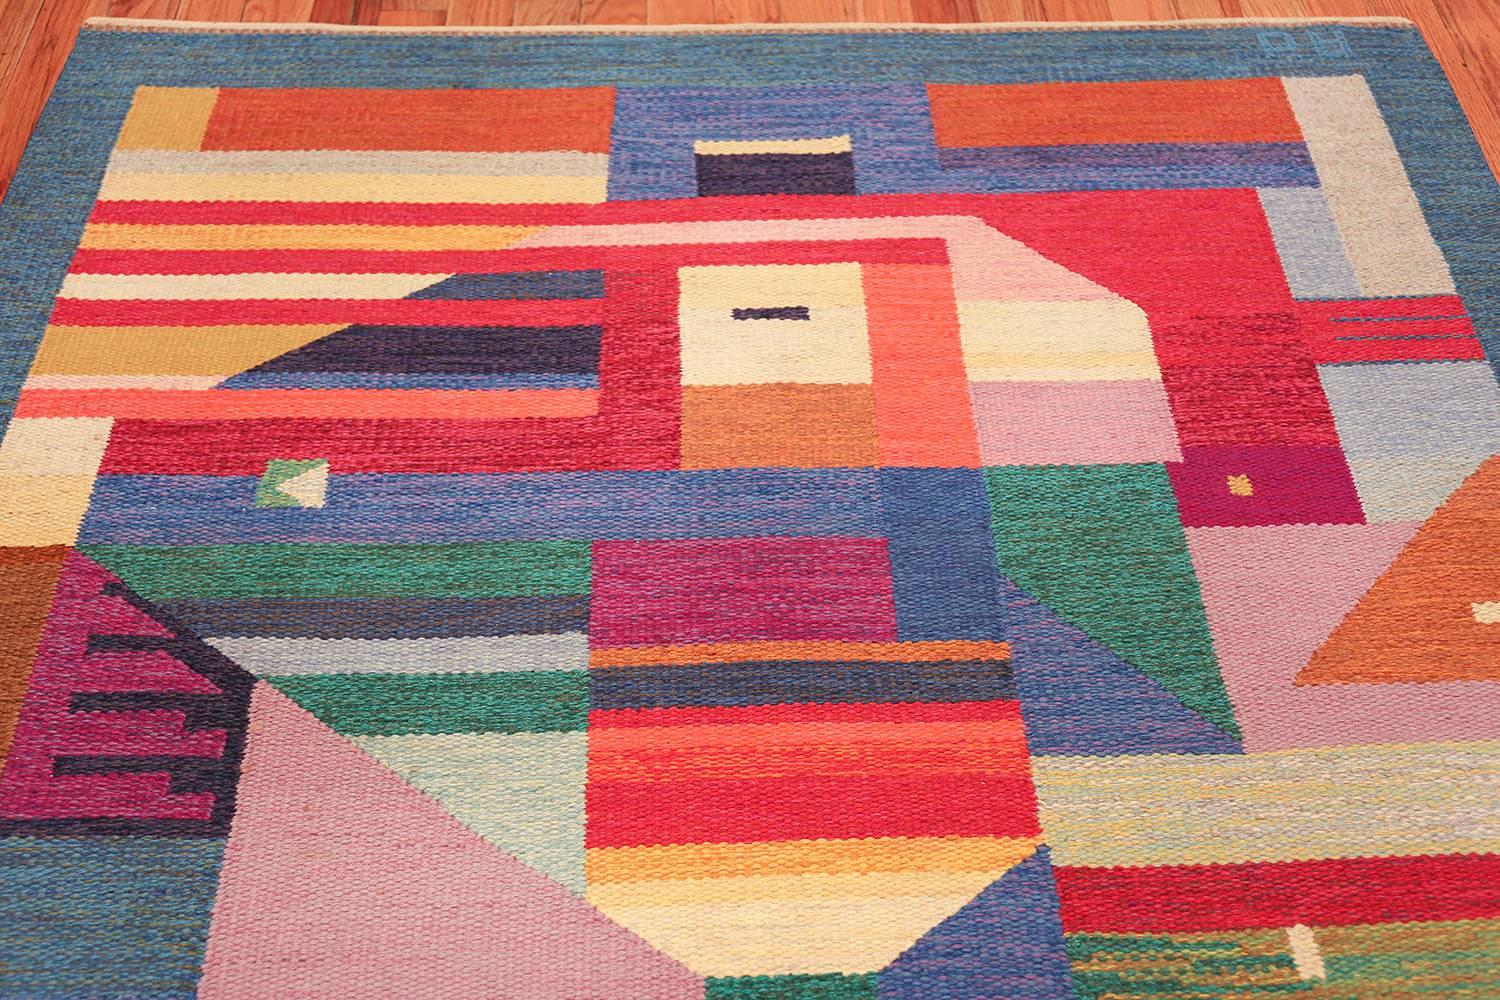 Mid-Century Modern Colorful Vintage Scandinavian Kilim Rug by Agda Osterberg. Size: 5' 5